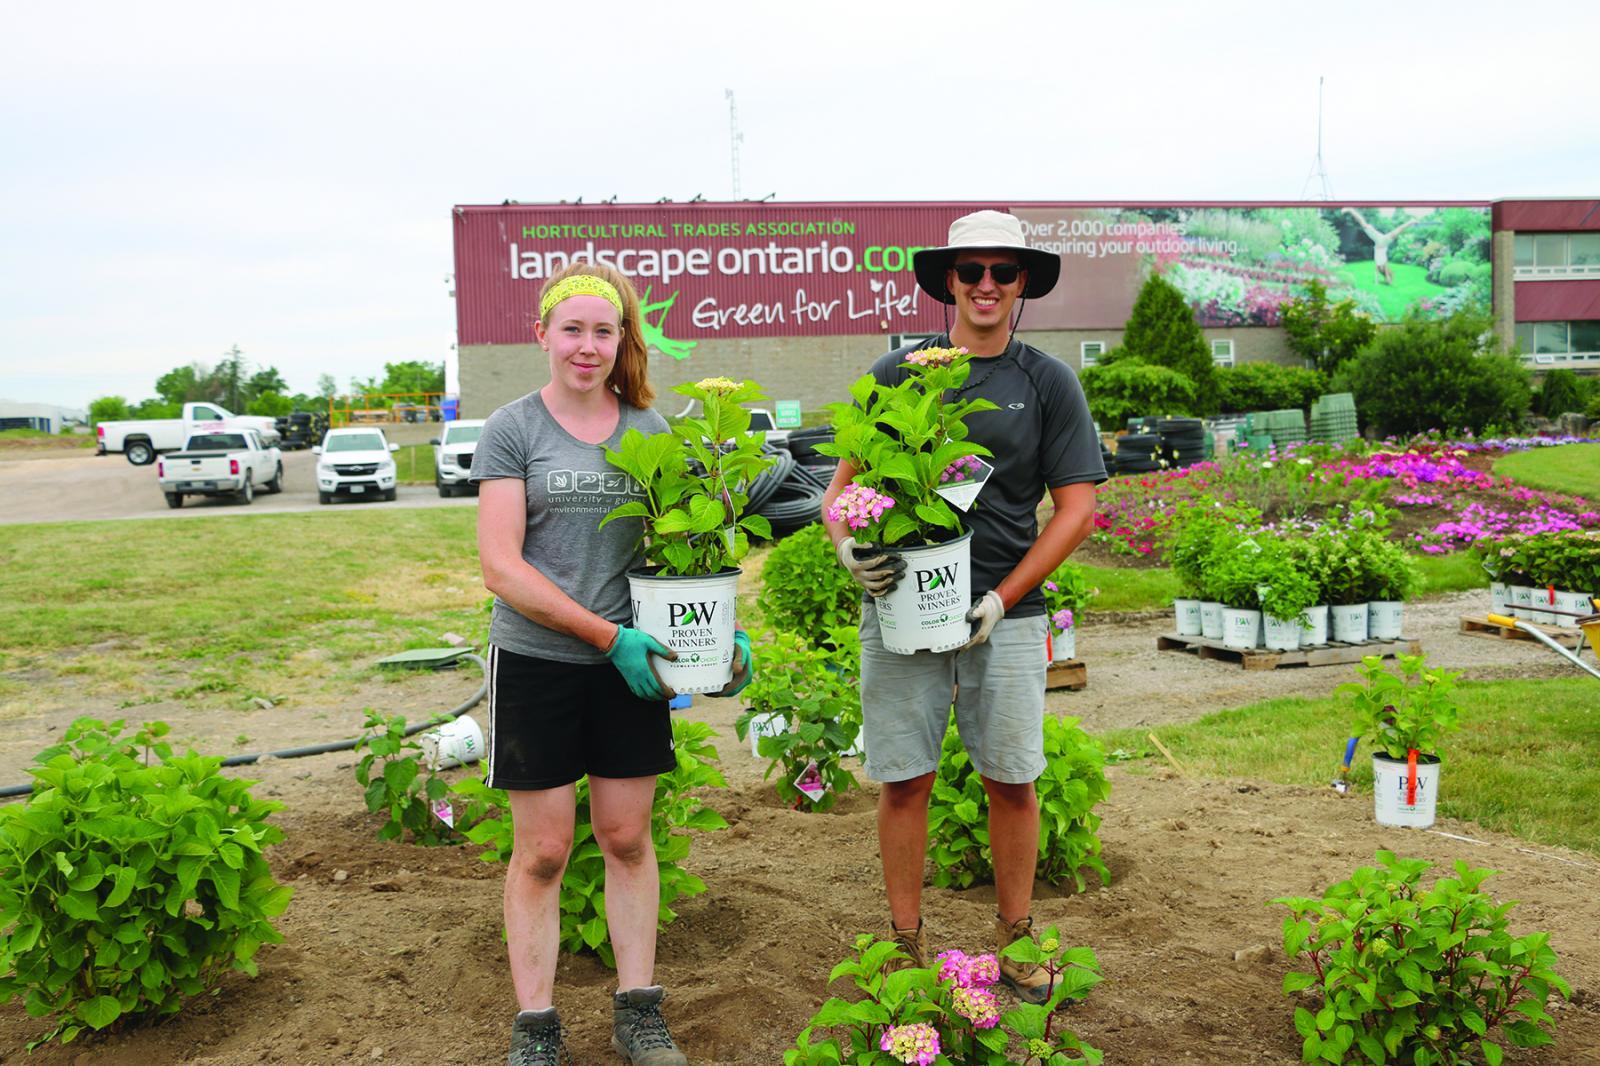 Trial garden site features new plants and expansion